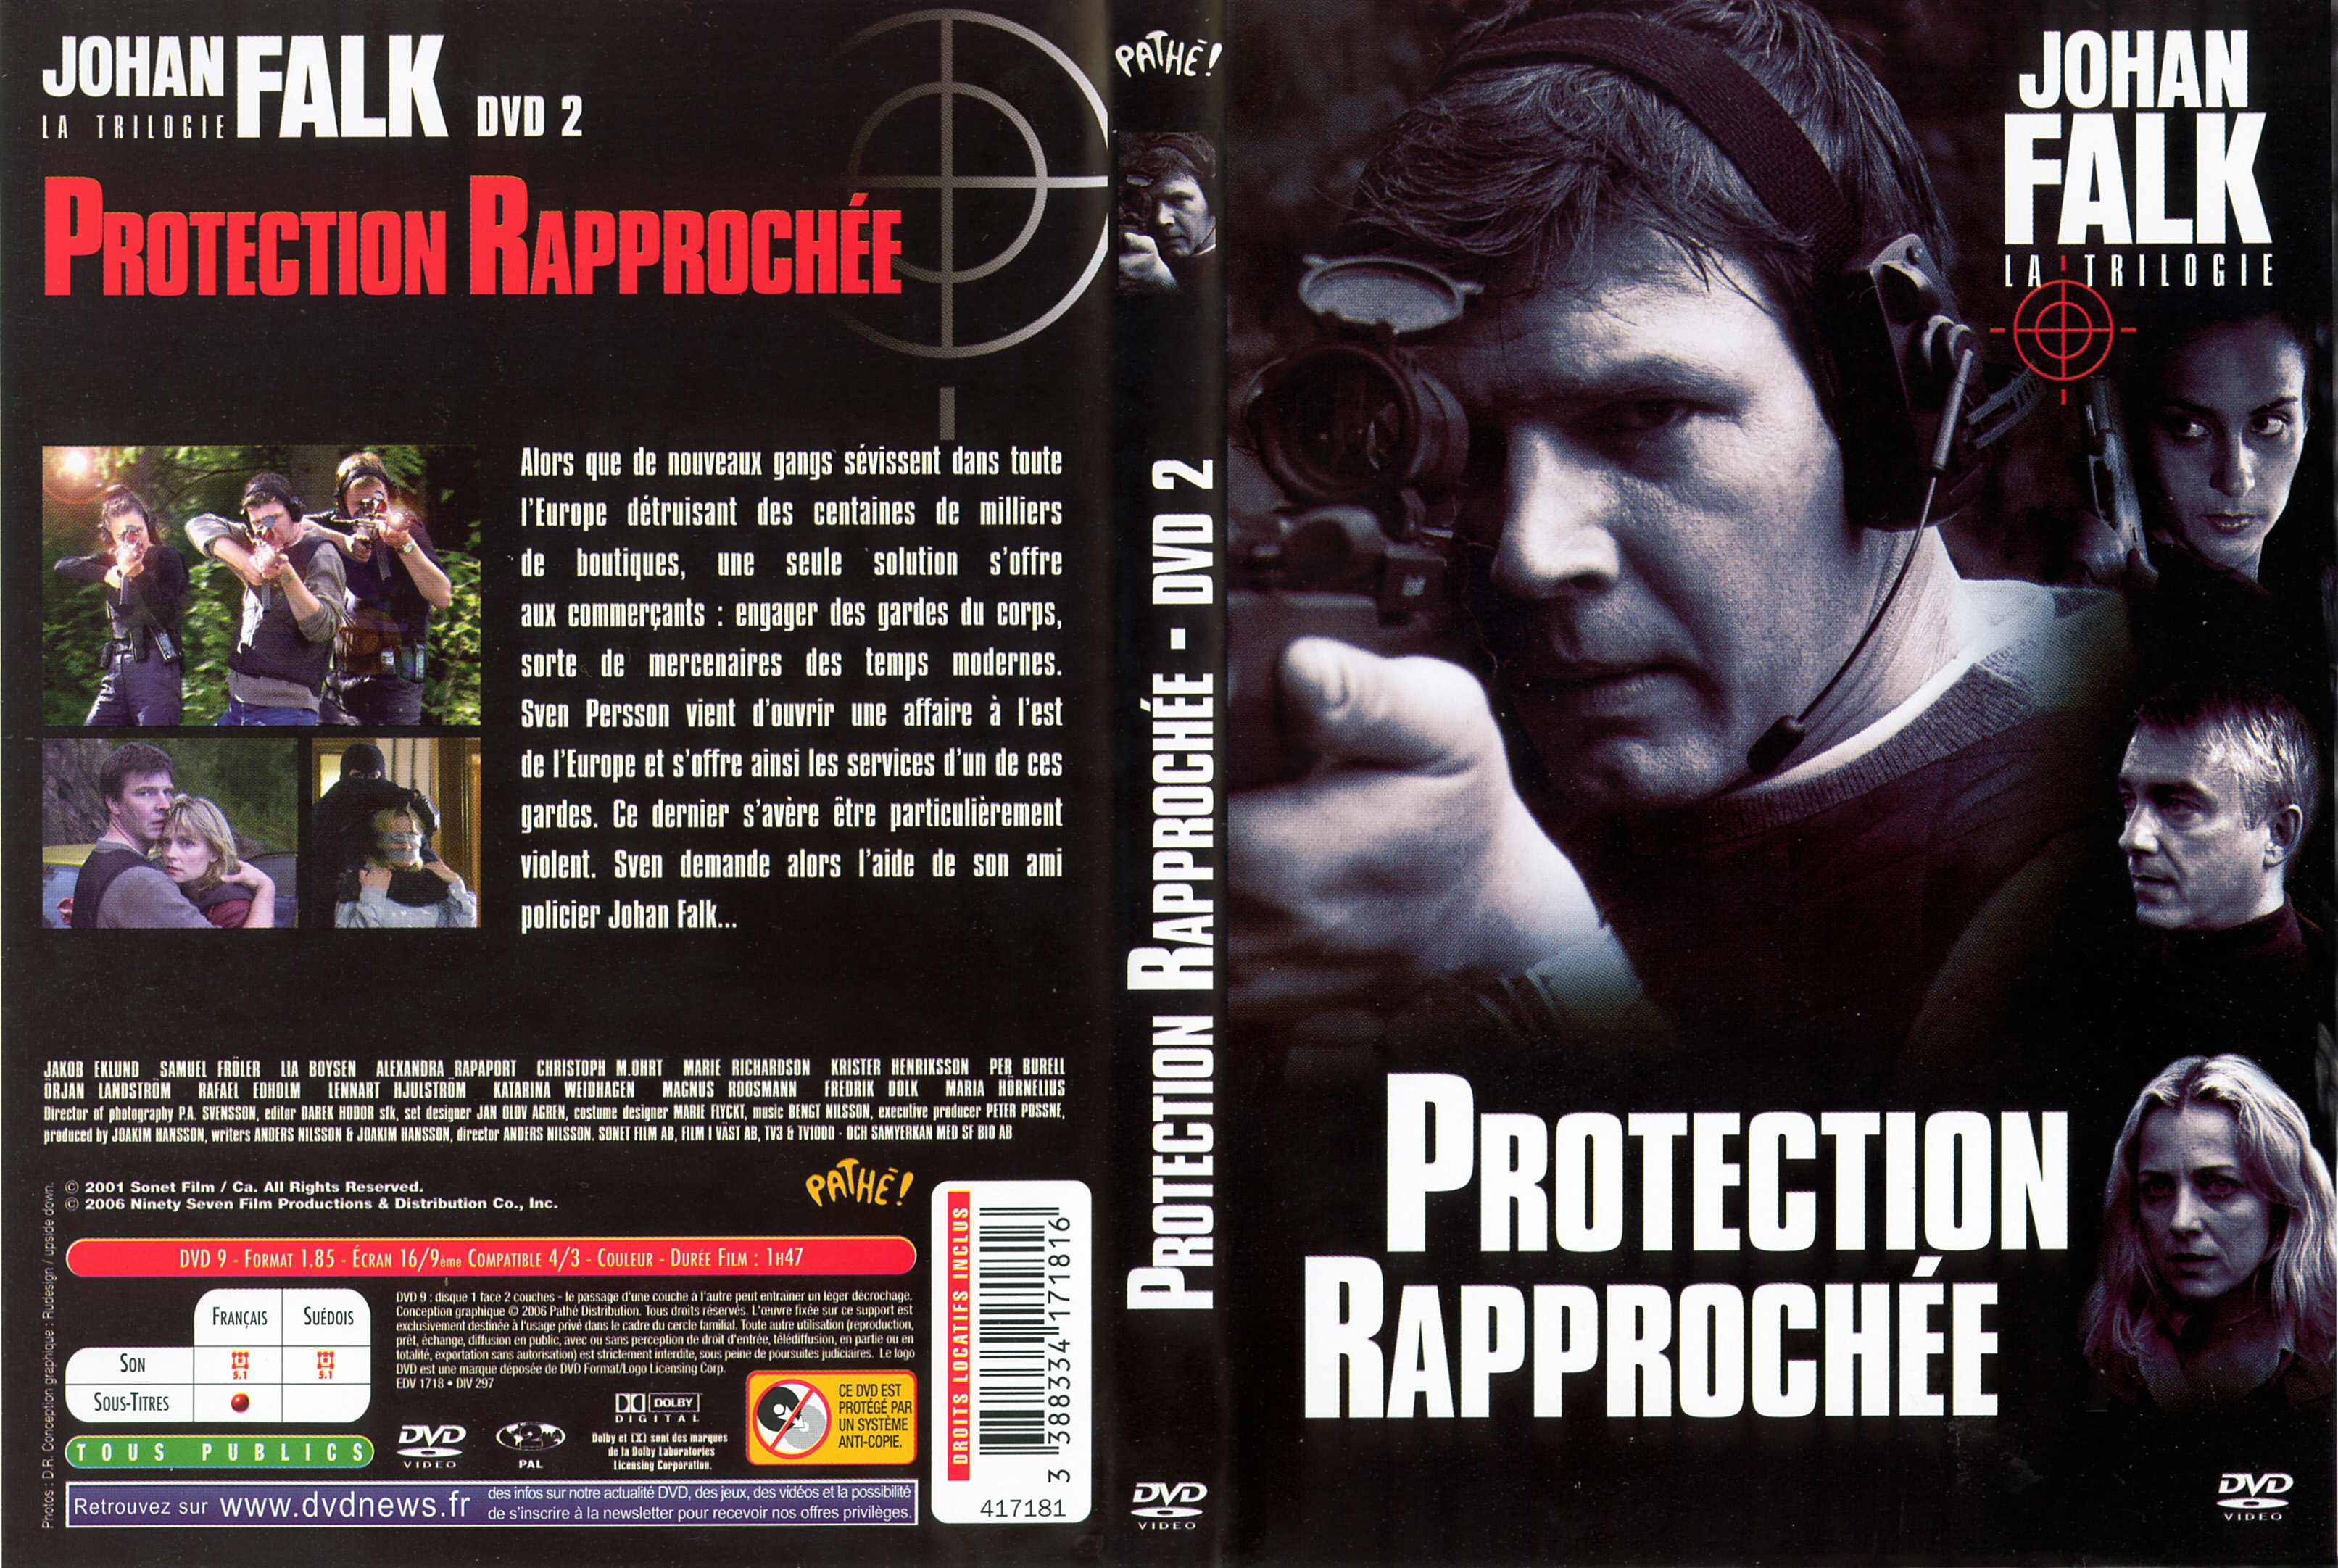 Jaquette DVD Protection rapproche (2001)